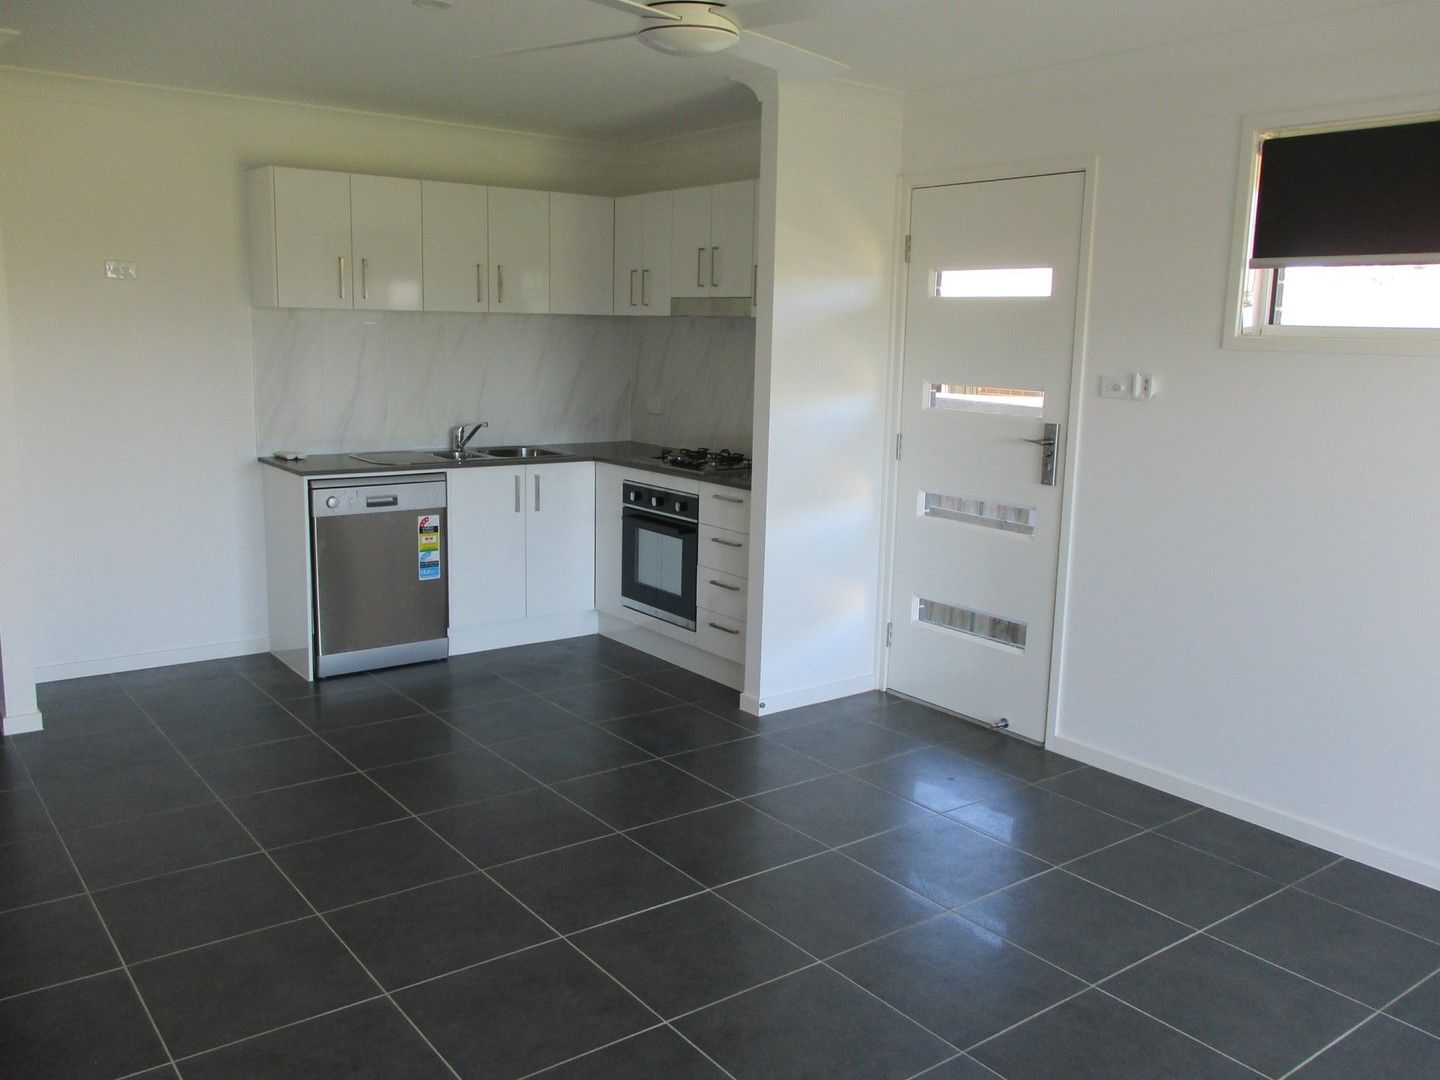 2 bedrooms House in 58A Plover Circuit ABERGLASSLYN NSW, 2320